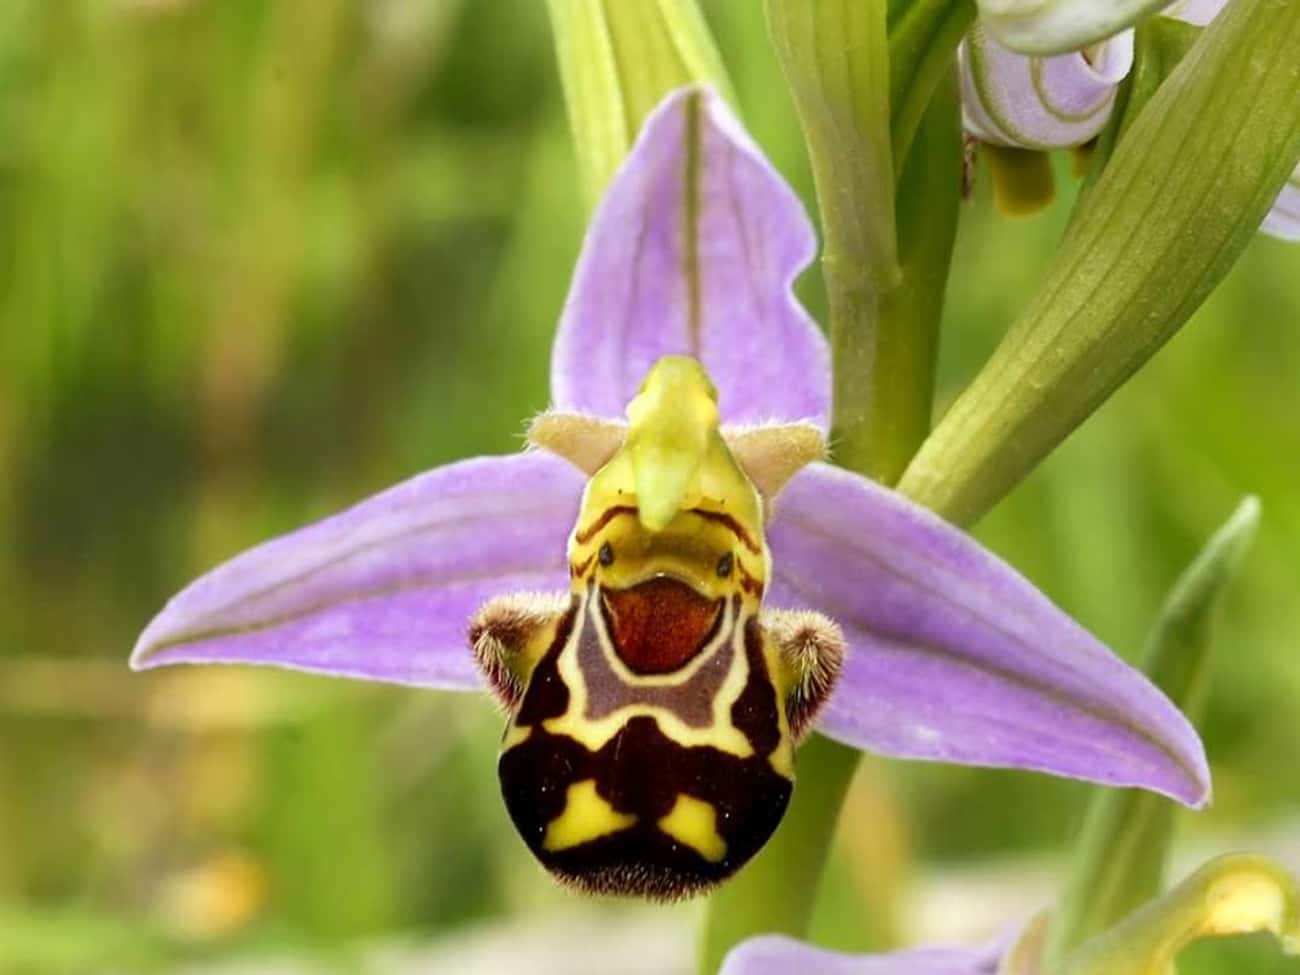 This Orchid